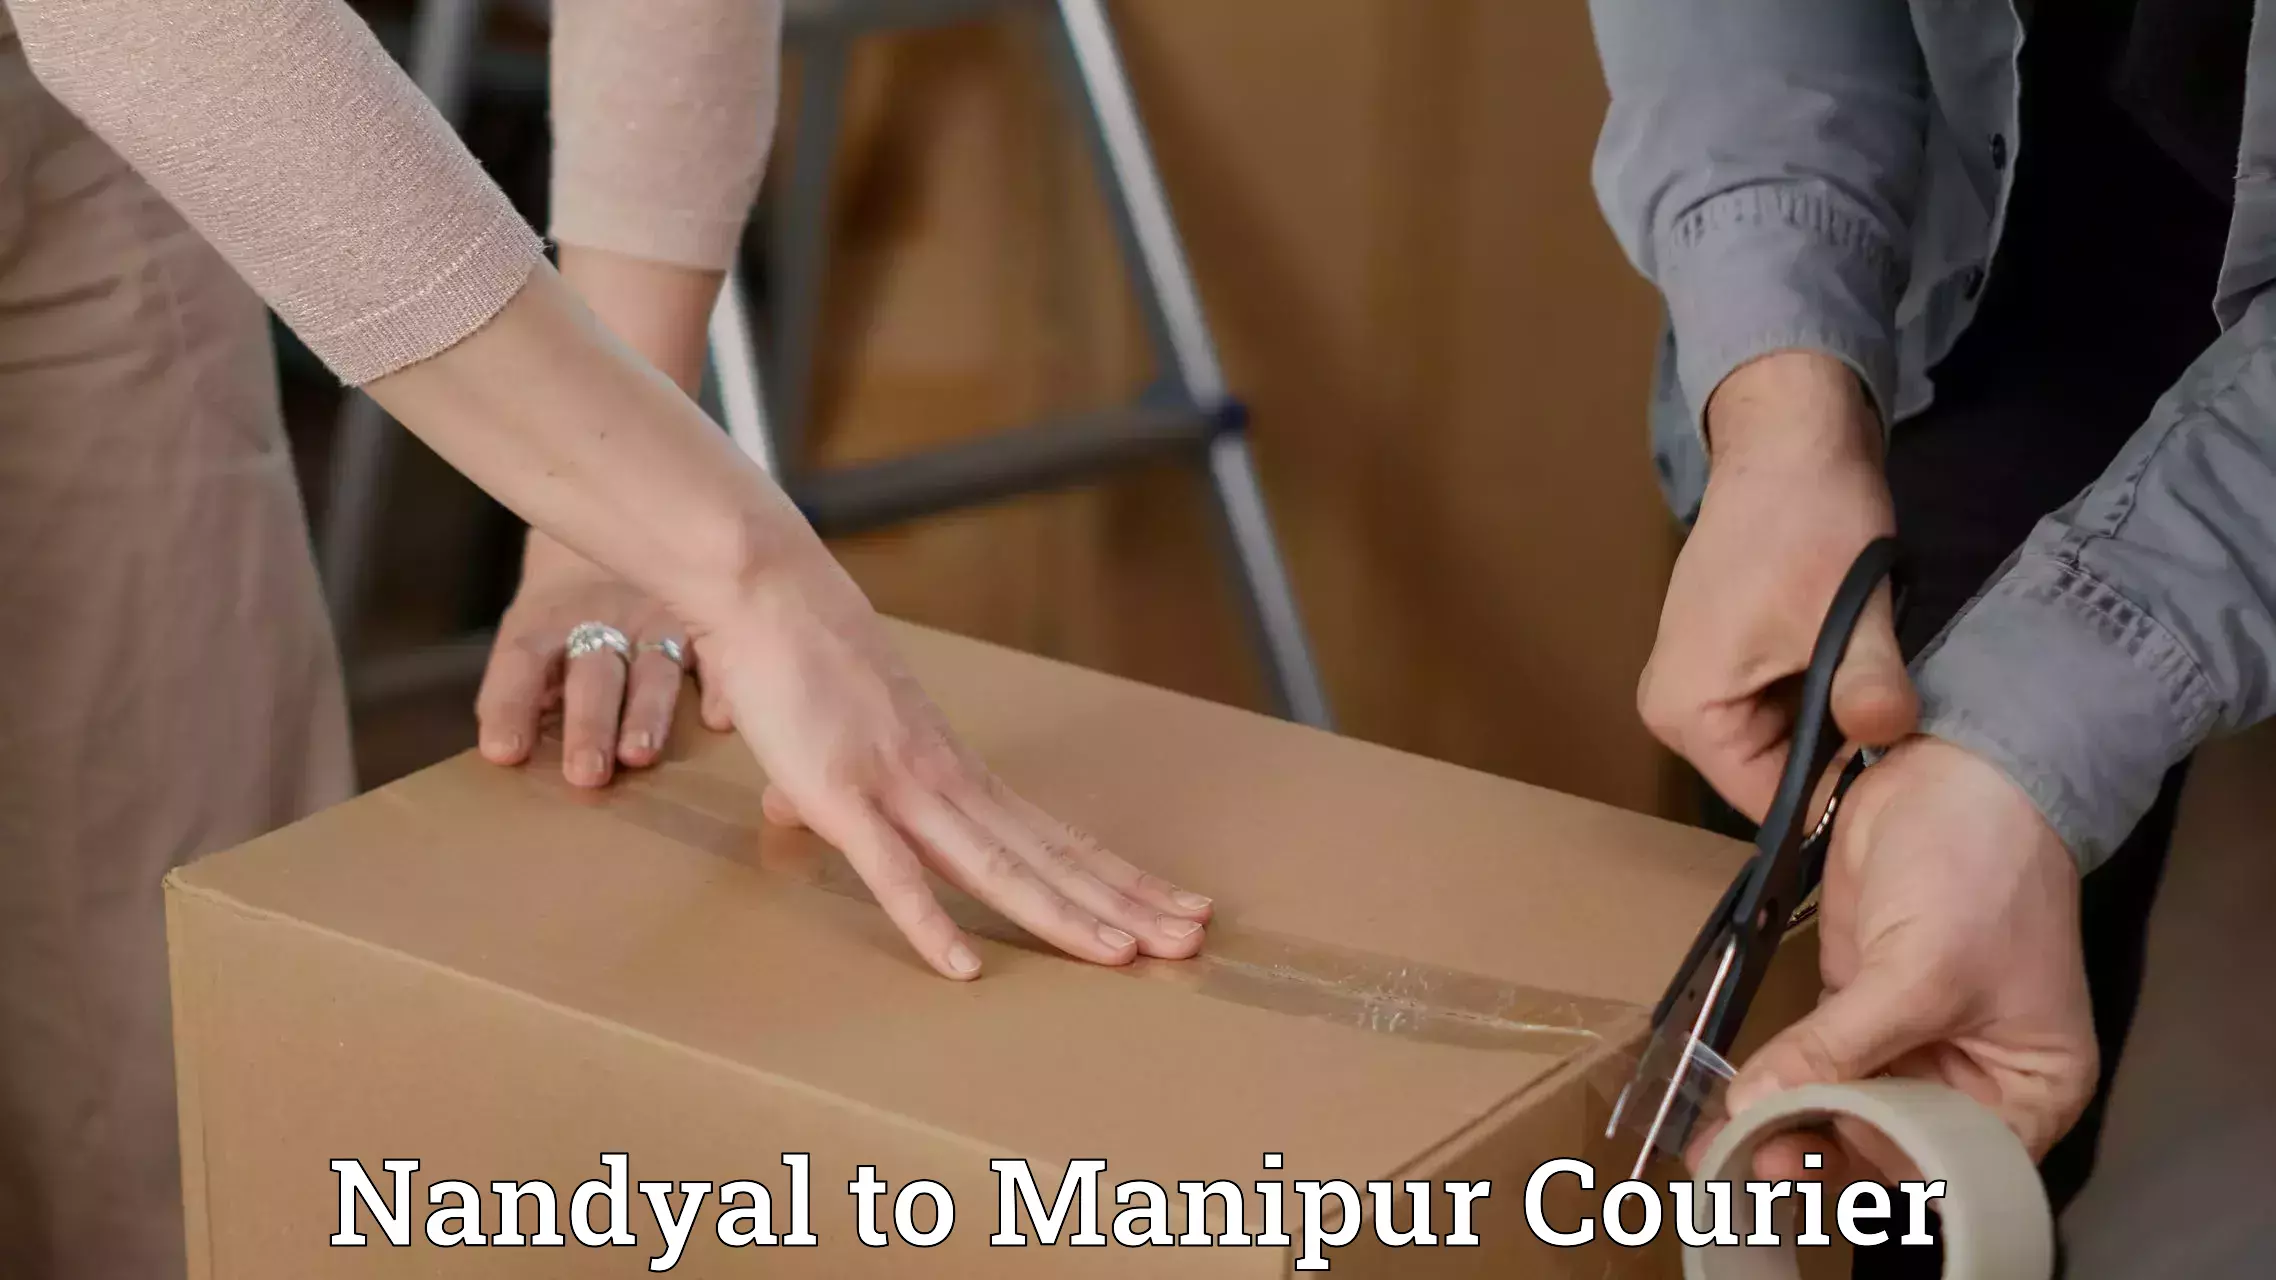 Courier service efficiency Nandyal to Manipur